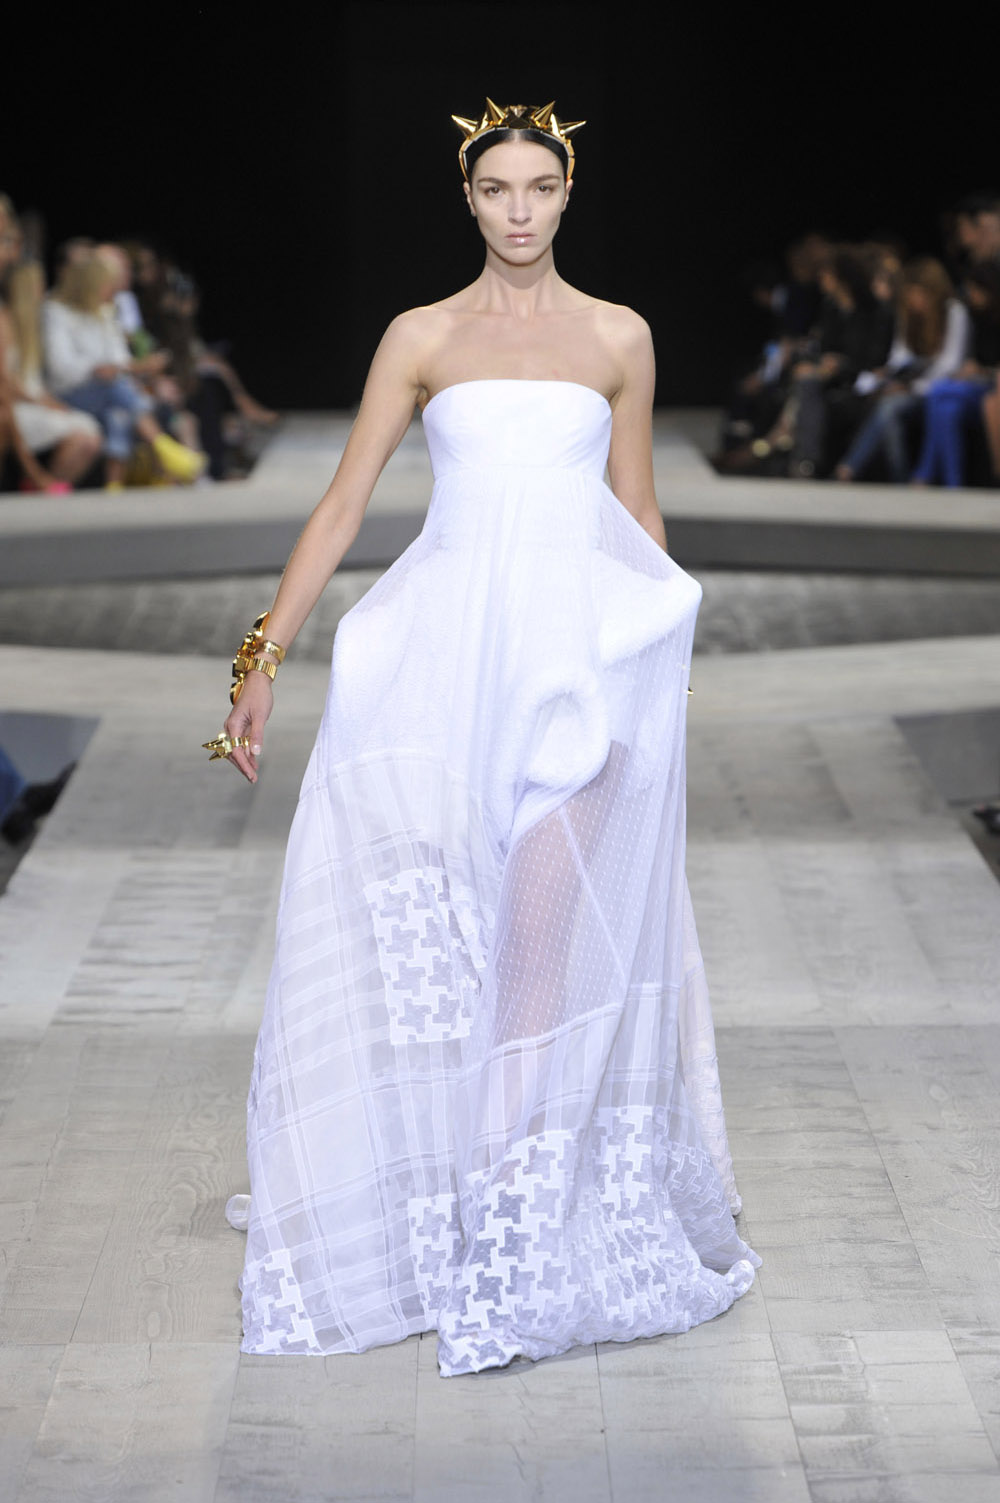 Givenchy Haute Couture Fall 2009: Modern Arabian Nights